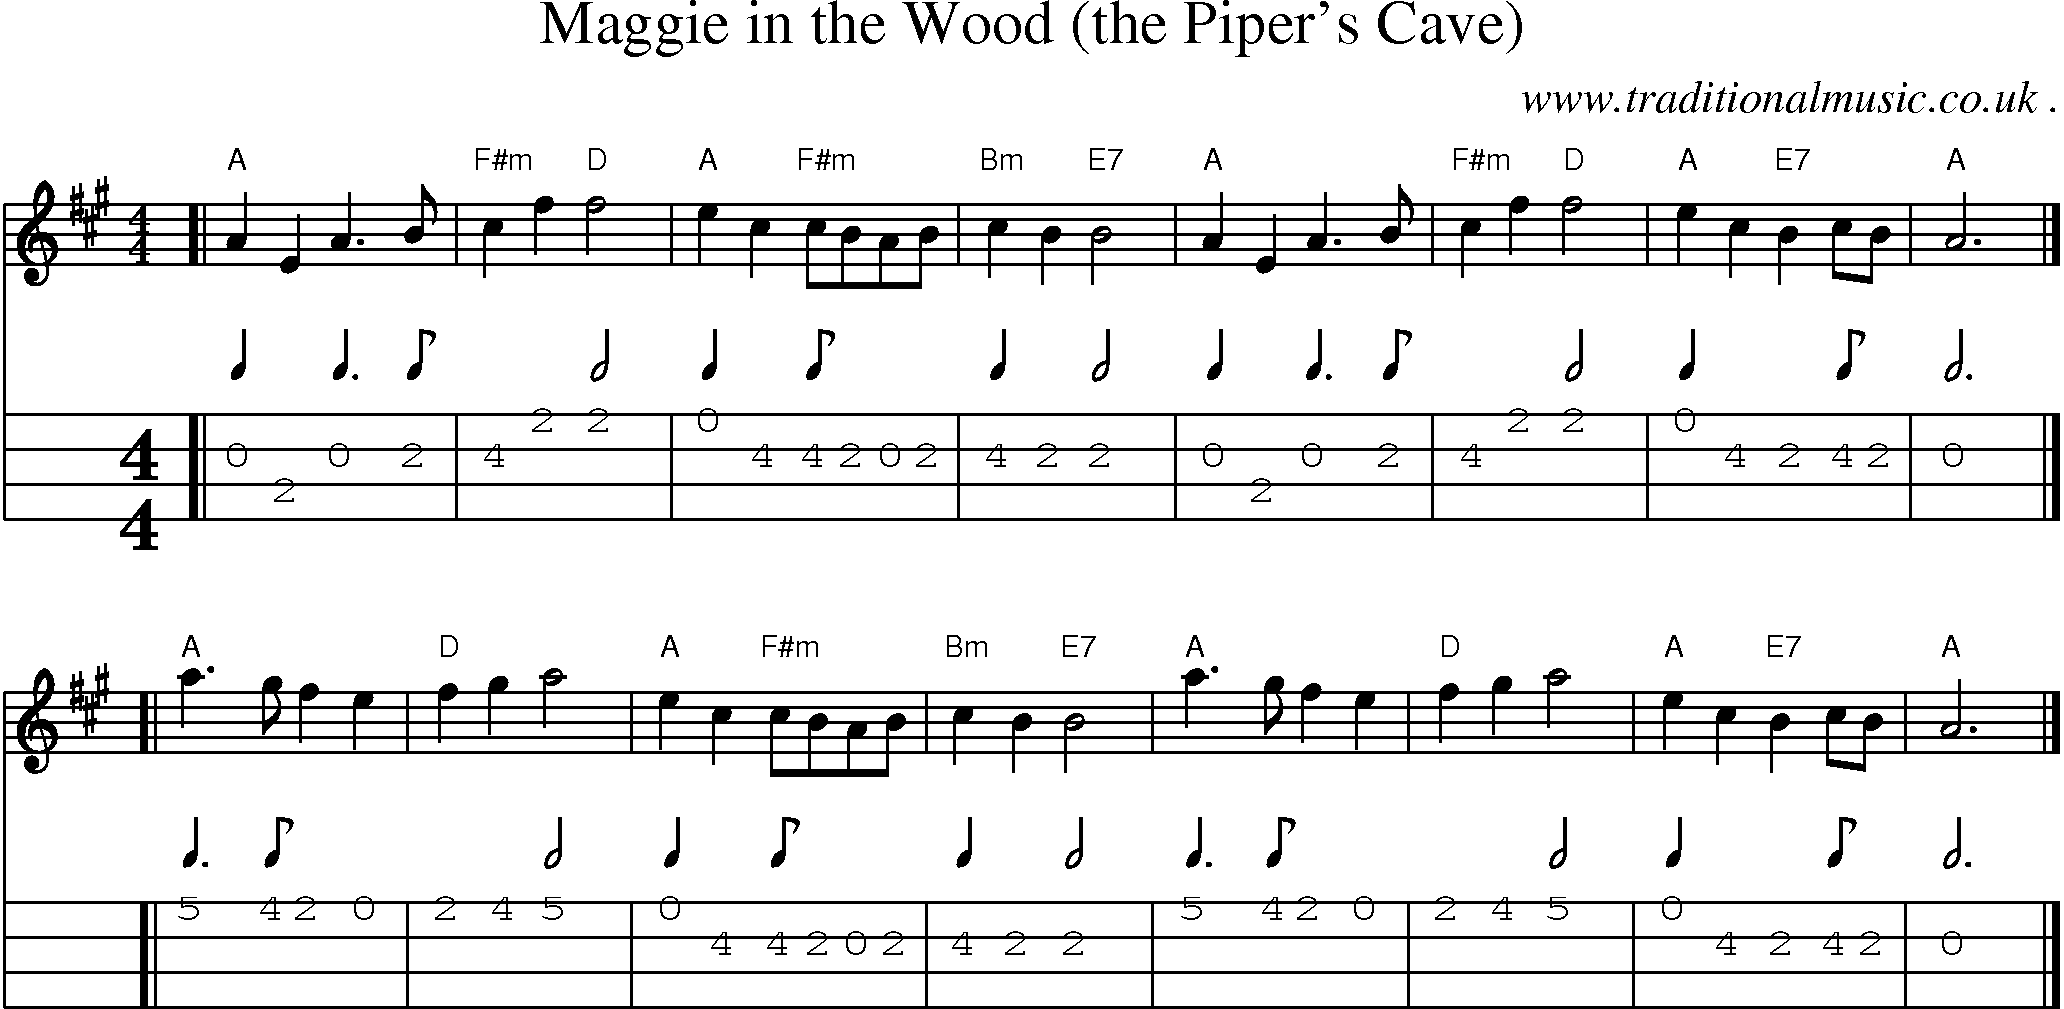 Sheet-music  score, Chords and Mandolin Tabs for Maggie In The Wood The Pipers Cave